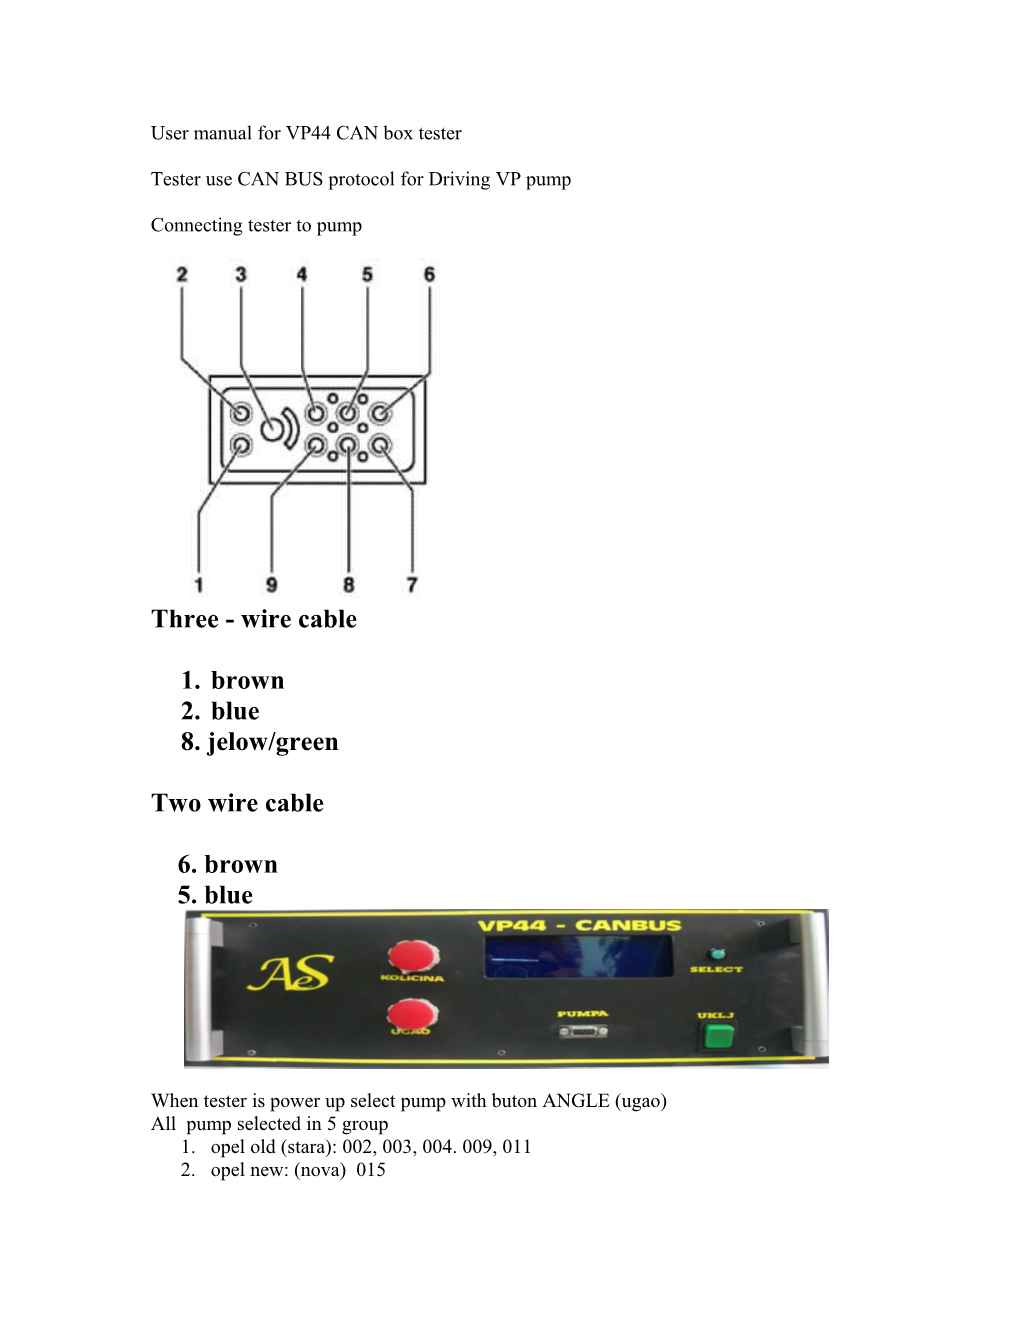 User Manual for VP44 CAN Box Tester